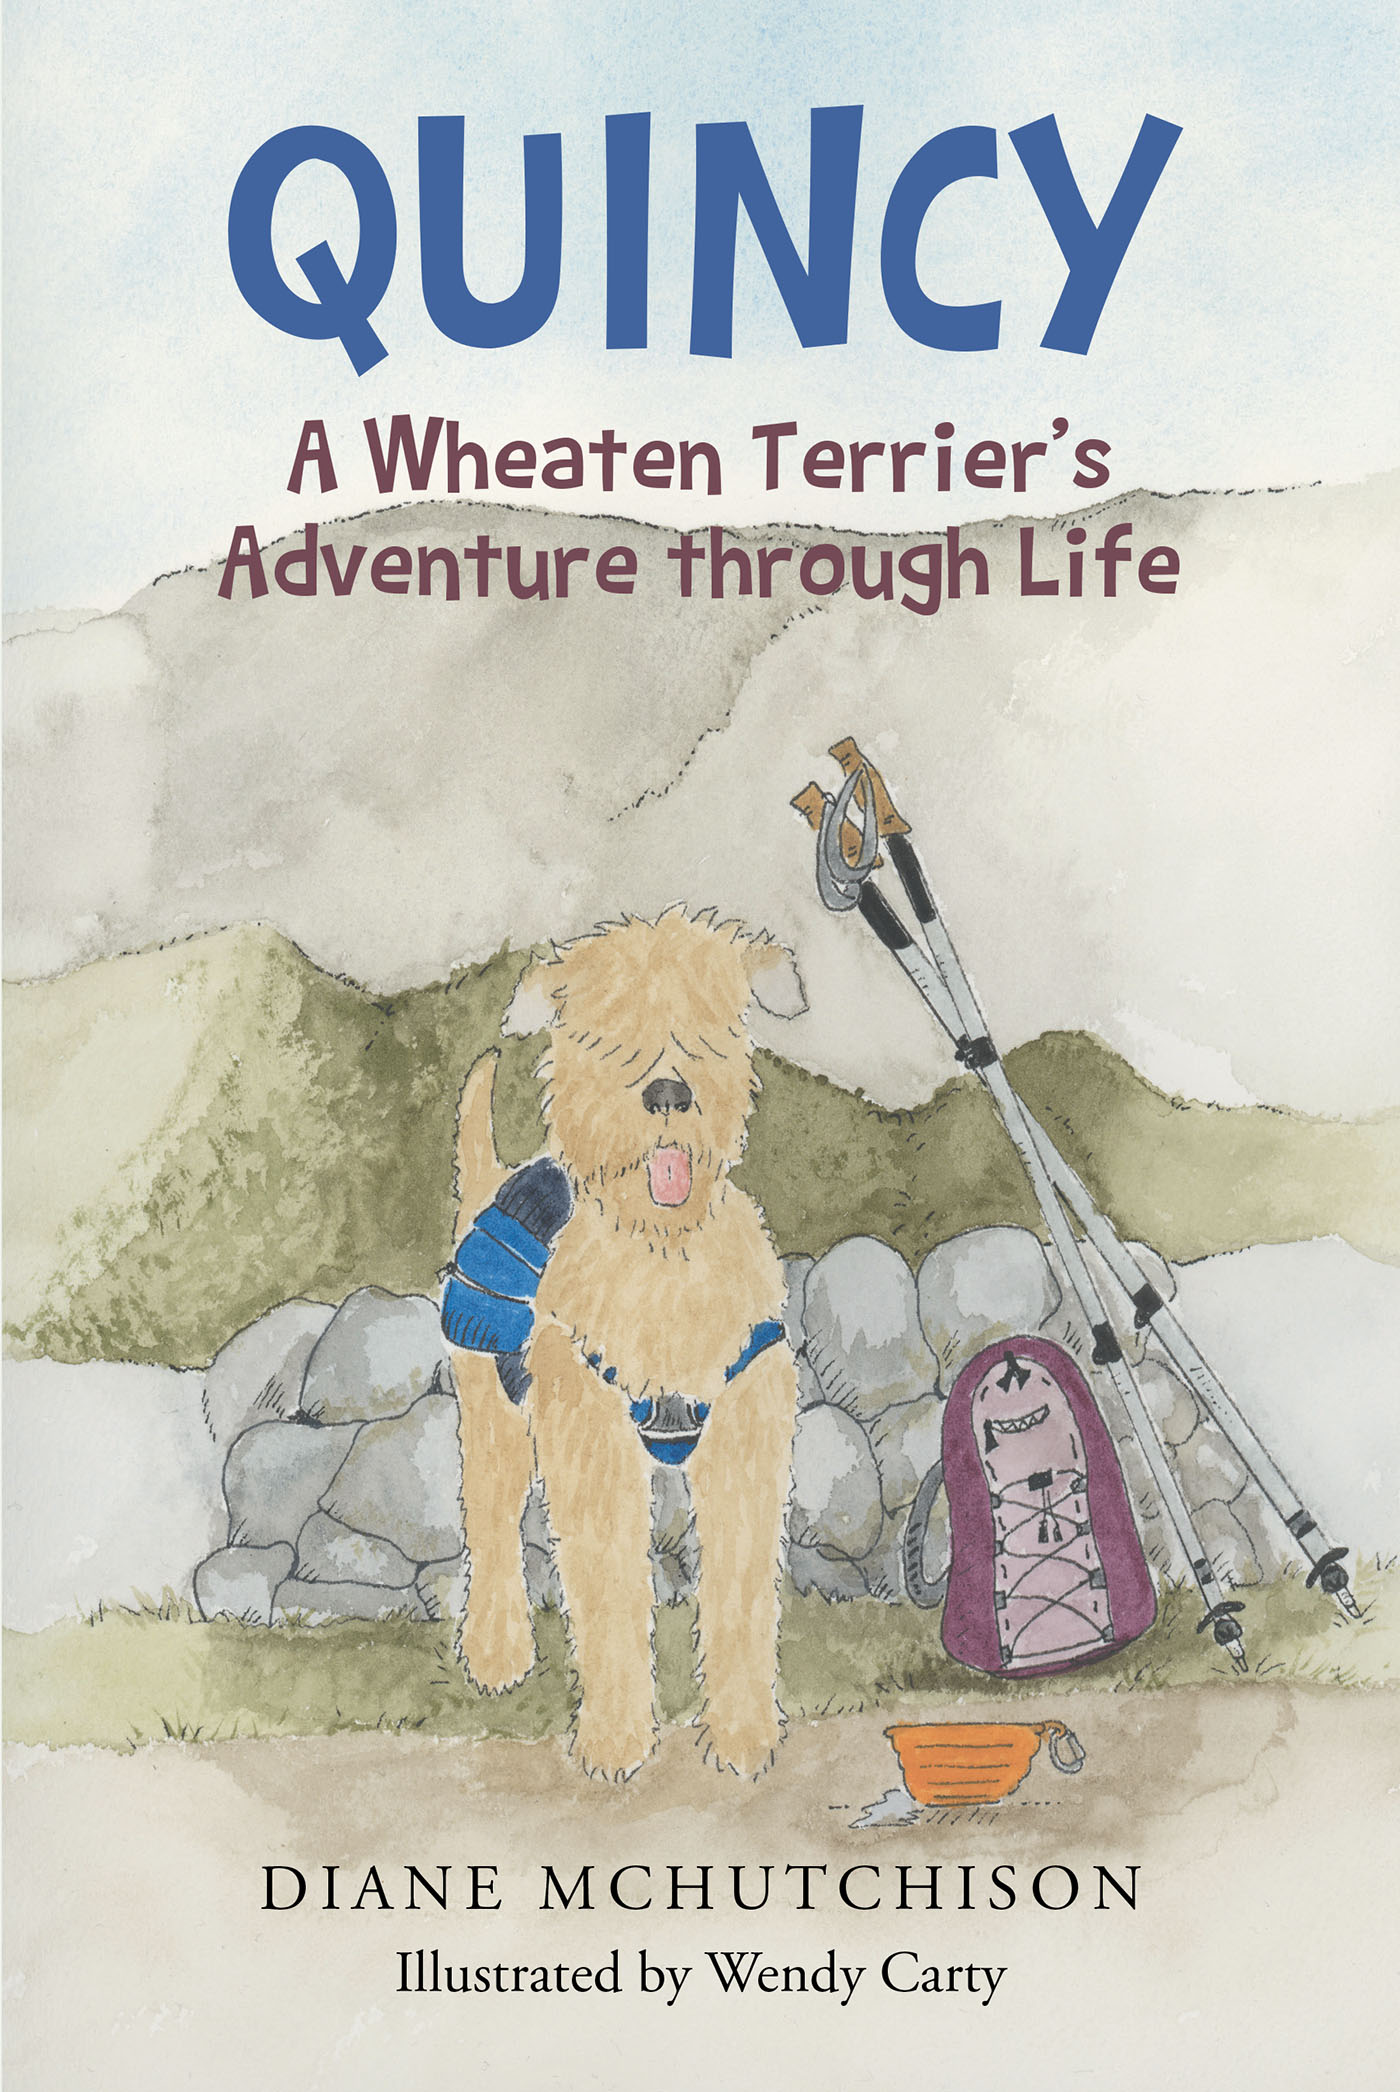 Author Diane Mchutchison’s New Book, "Quincy: A Wheaten Terrier's Adventure through Life," is a Beautiful Story Told Through the Point of View of a Dog All About His Life